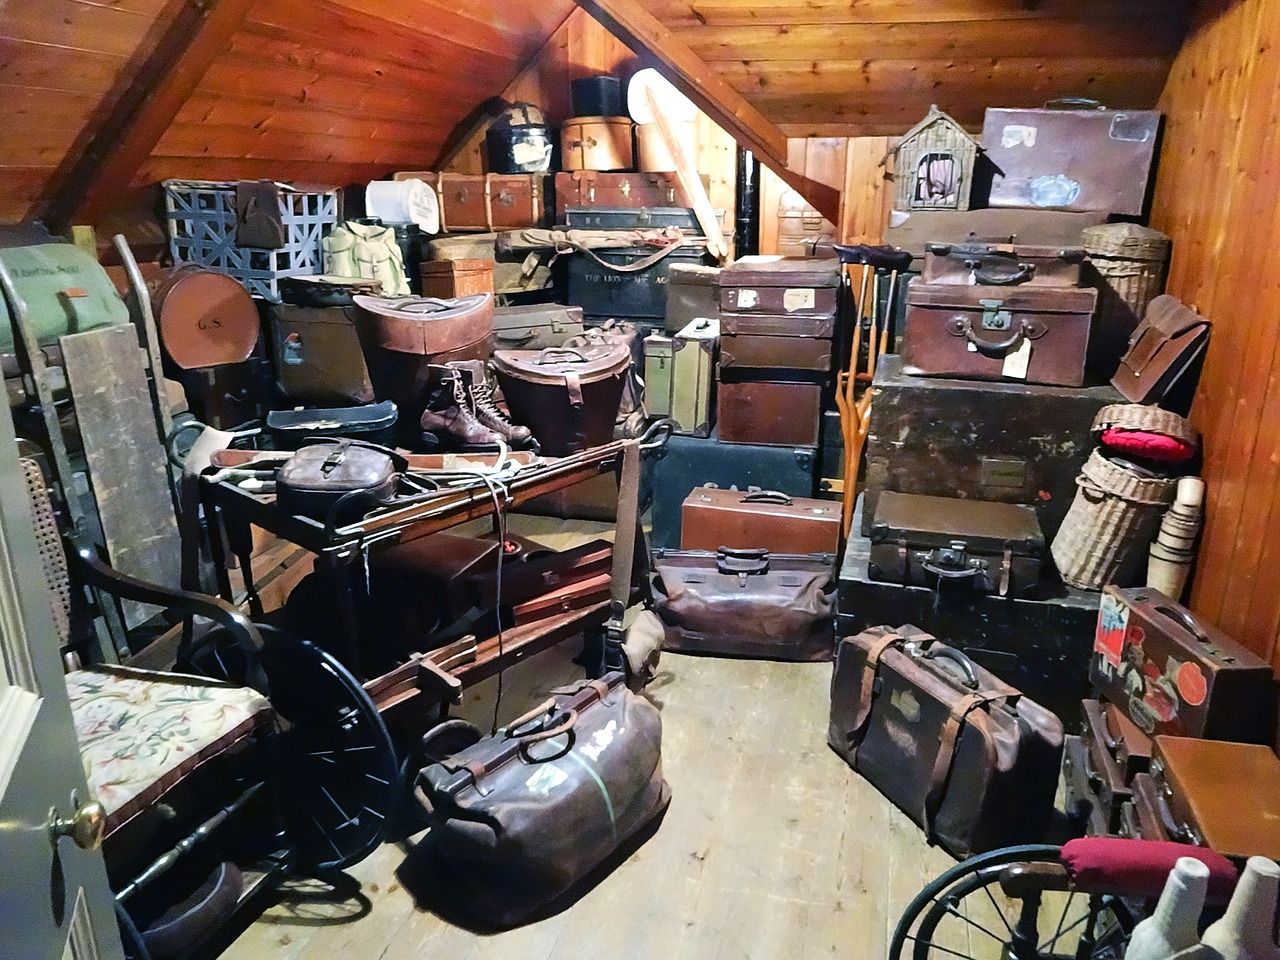 Pre-Listing Tip 4 shows an attic full of bags and luggage.